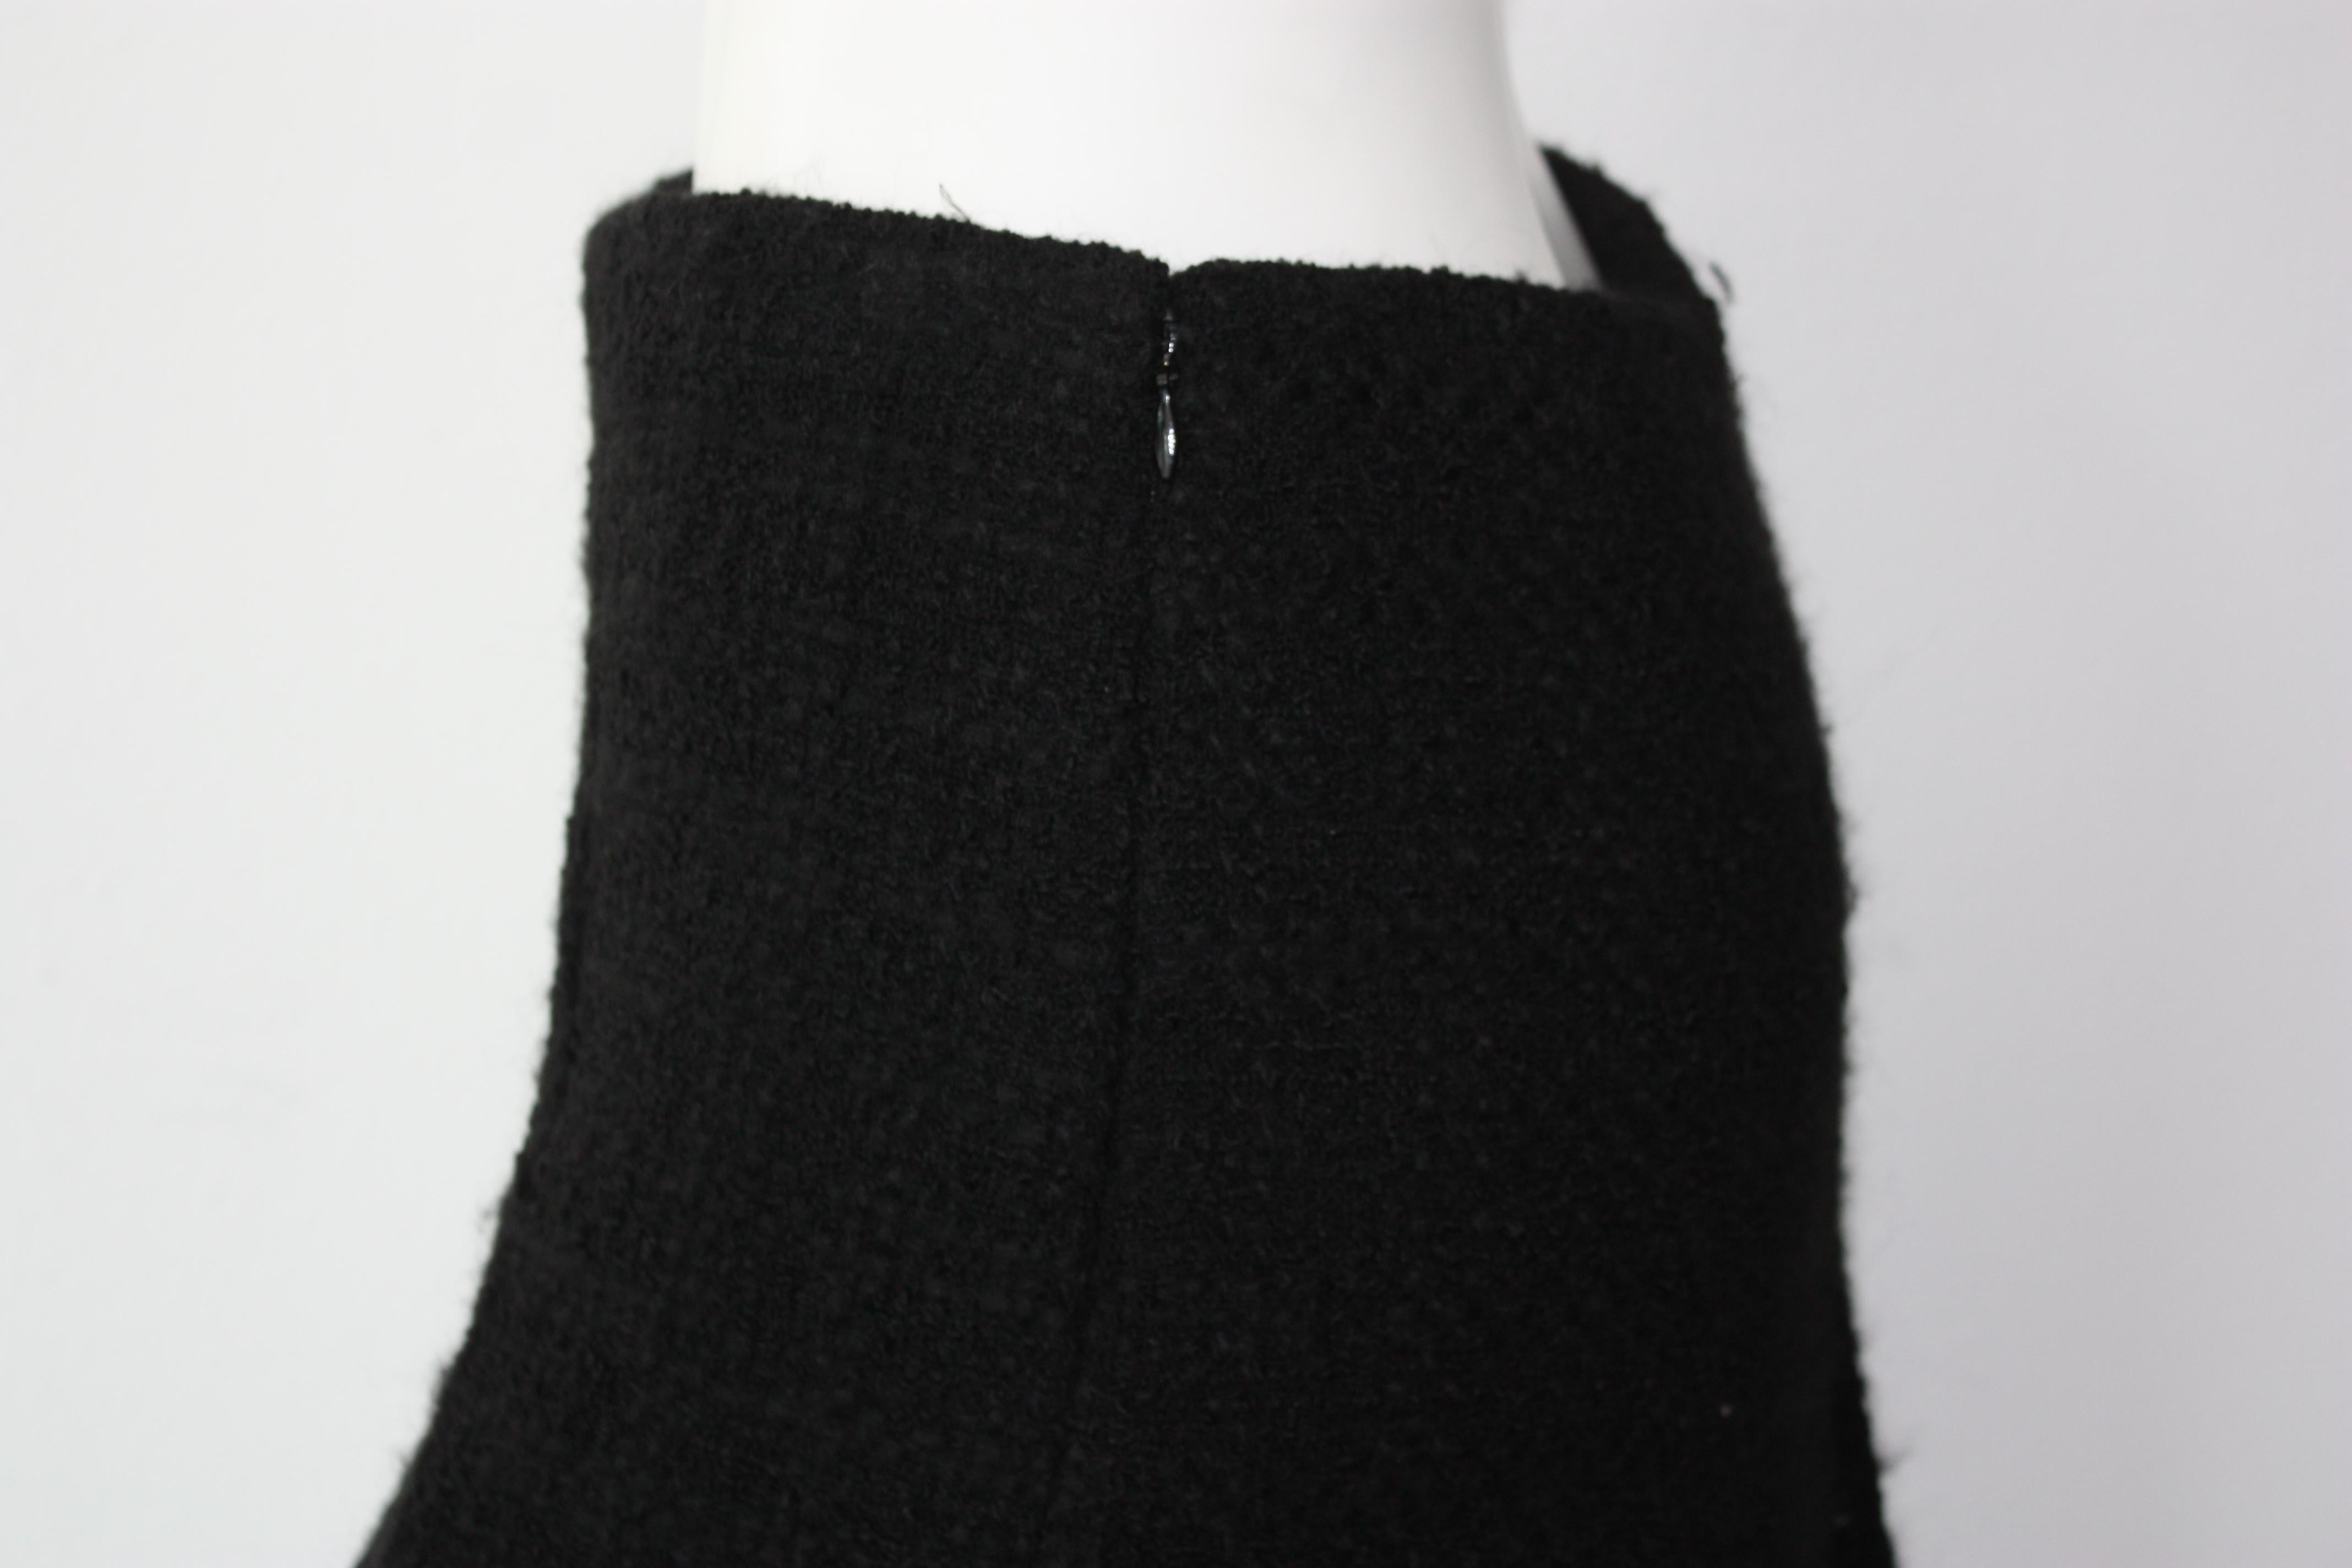 CLASSIC Chanel black tweed mini skirt. 
This skirt is a such a staple/classic edition to your wardrobe. 
New with tags, never been worn. 
Size 36
Retails for over $1500